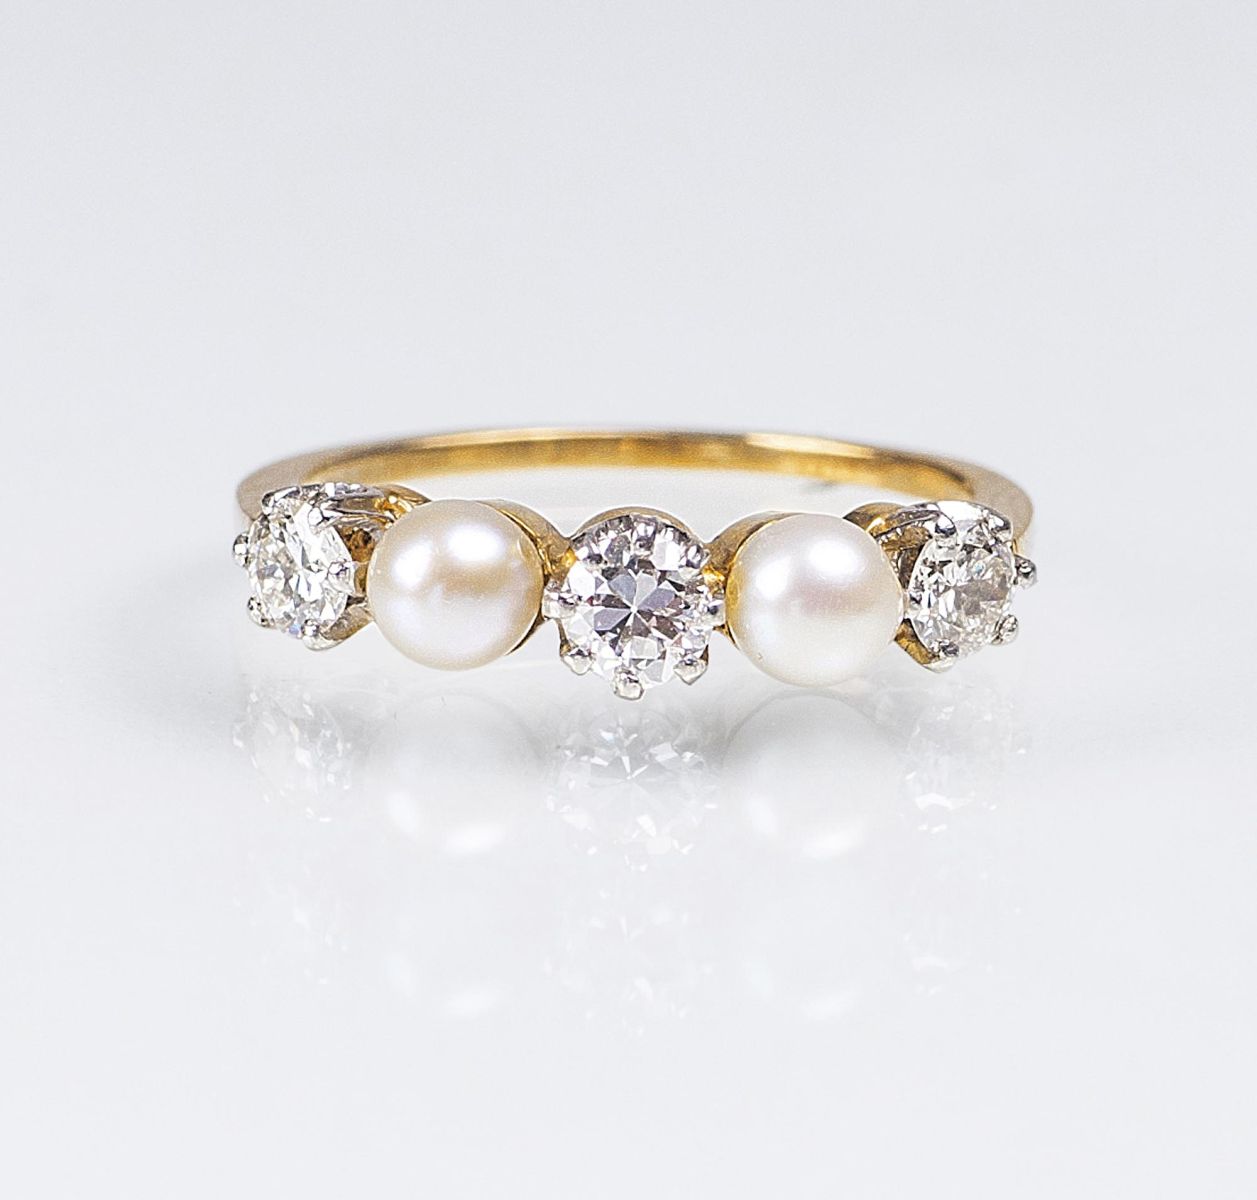 A petite Diamond Ring with Orient Pearls